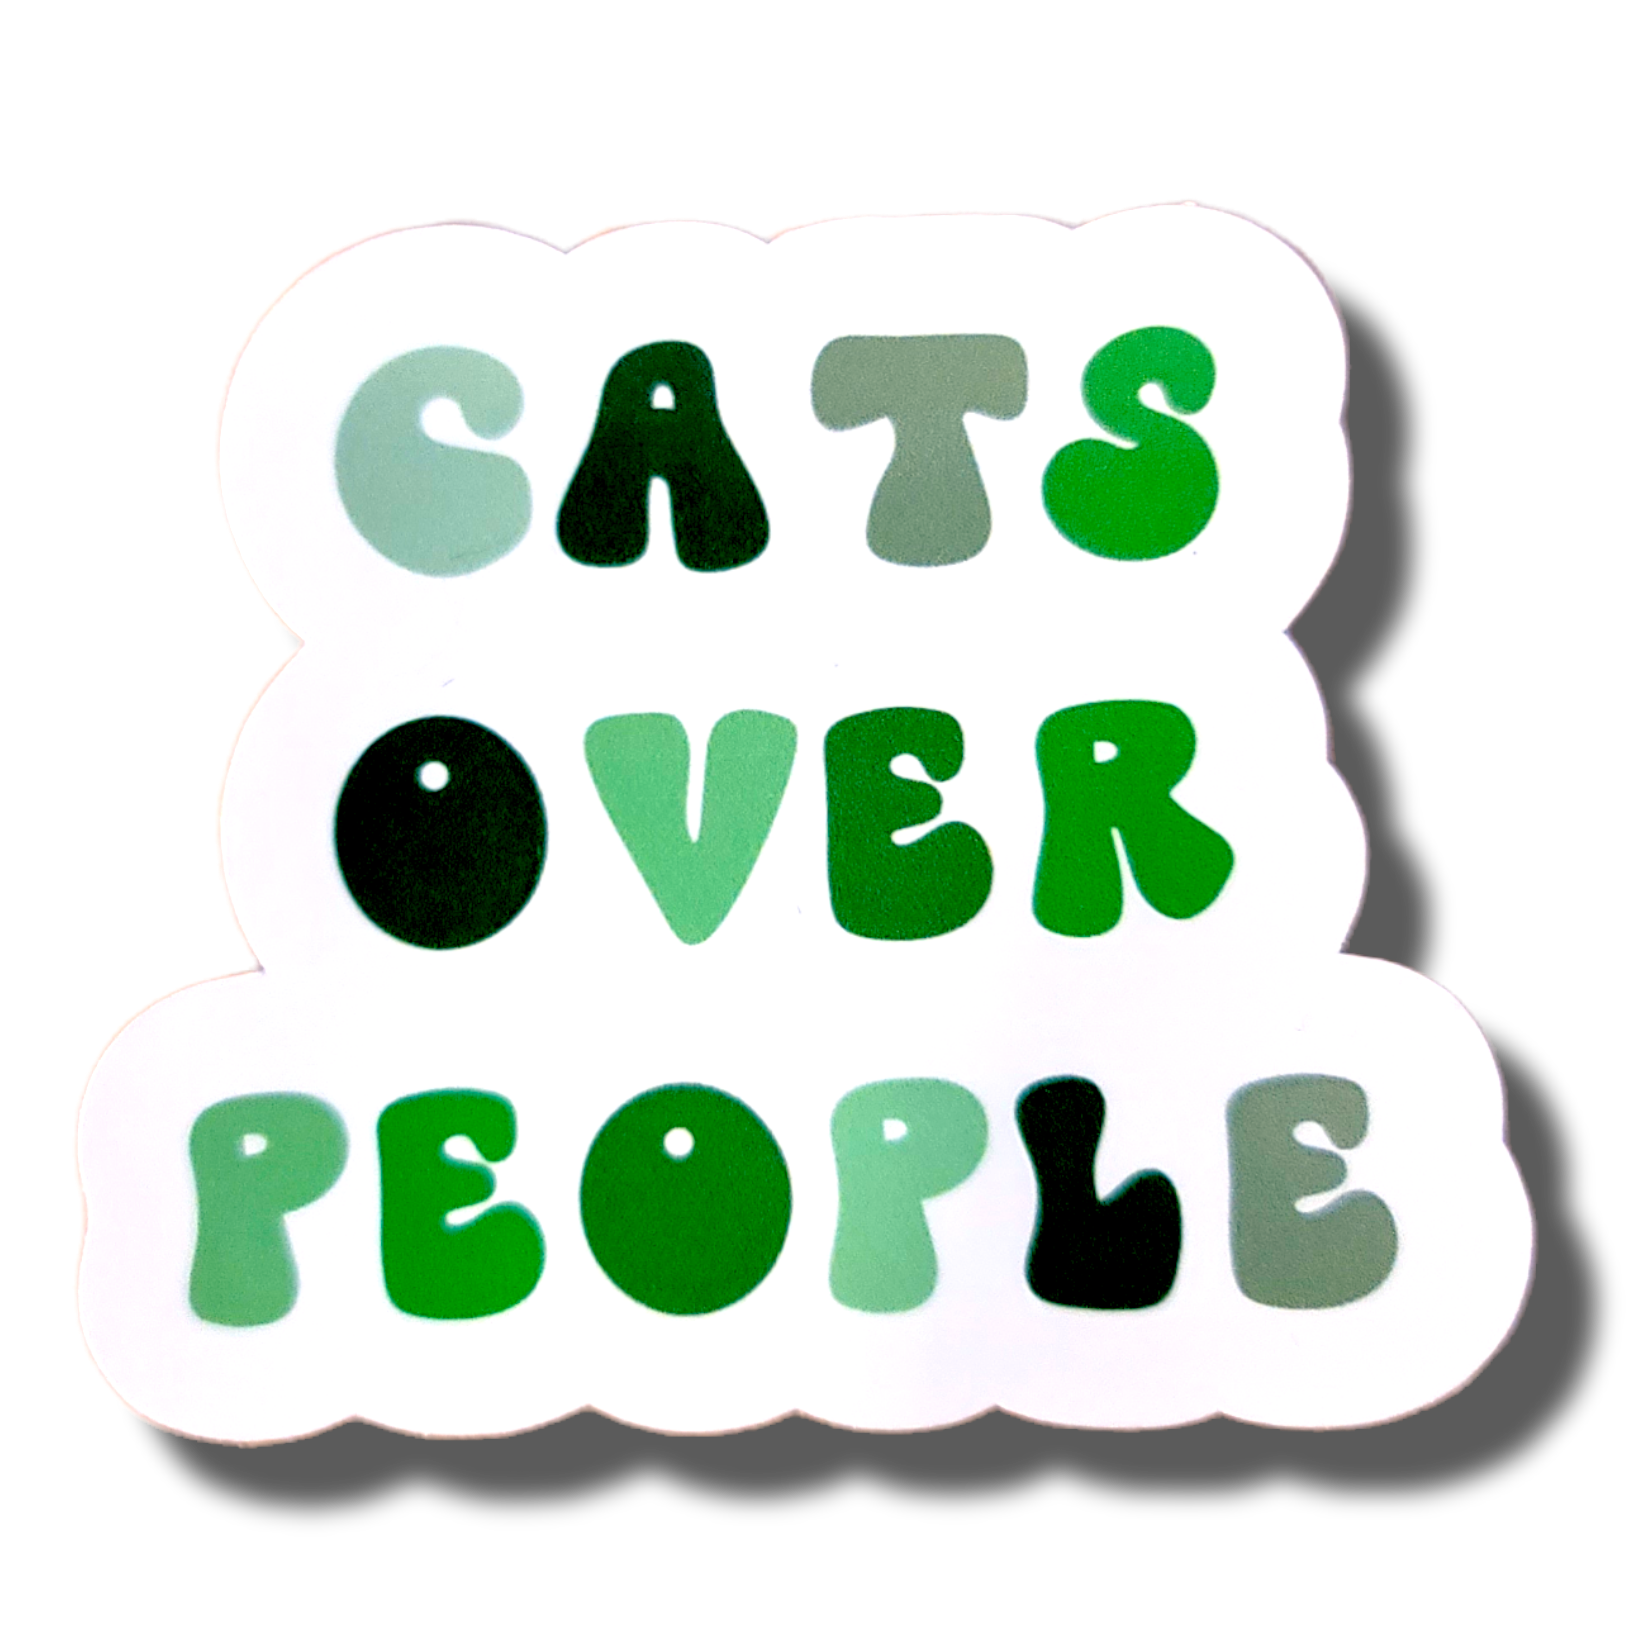 Cats Over People Sticker